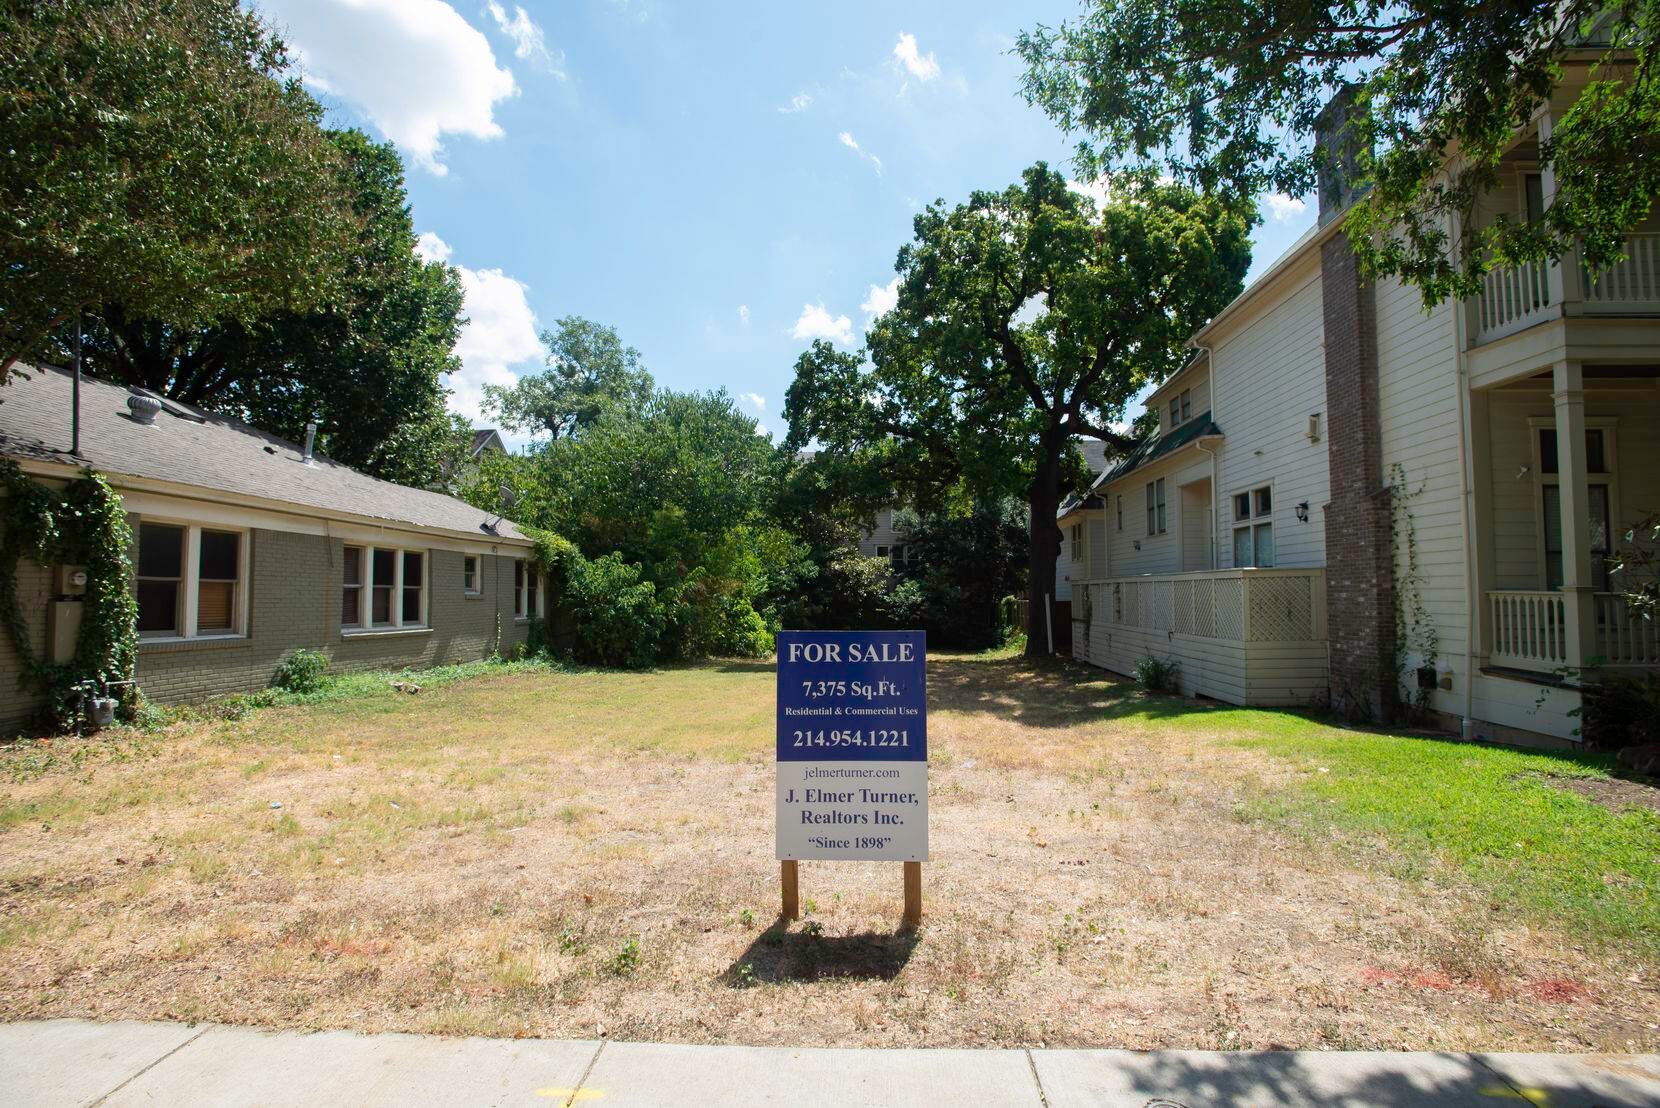 The 50-foot-wide lot on Thomas Avenue is being eyed by a homebuilders.